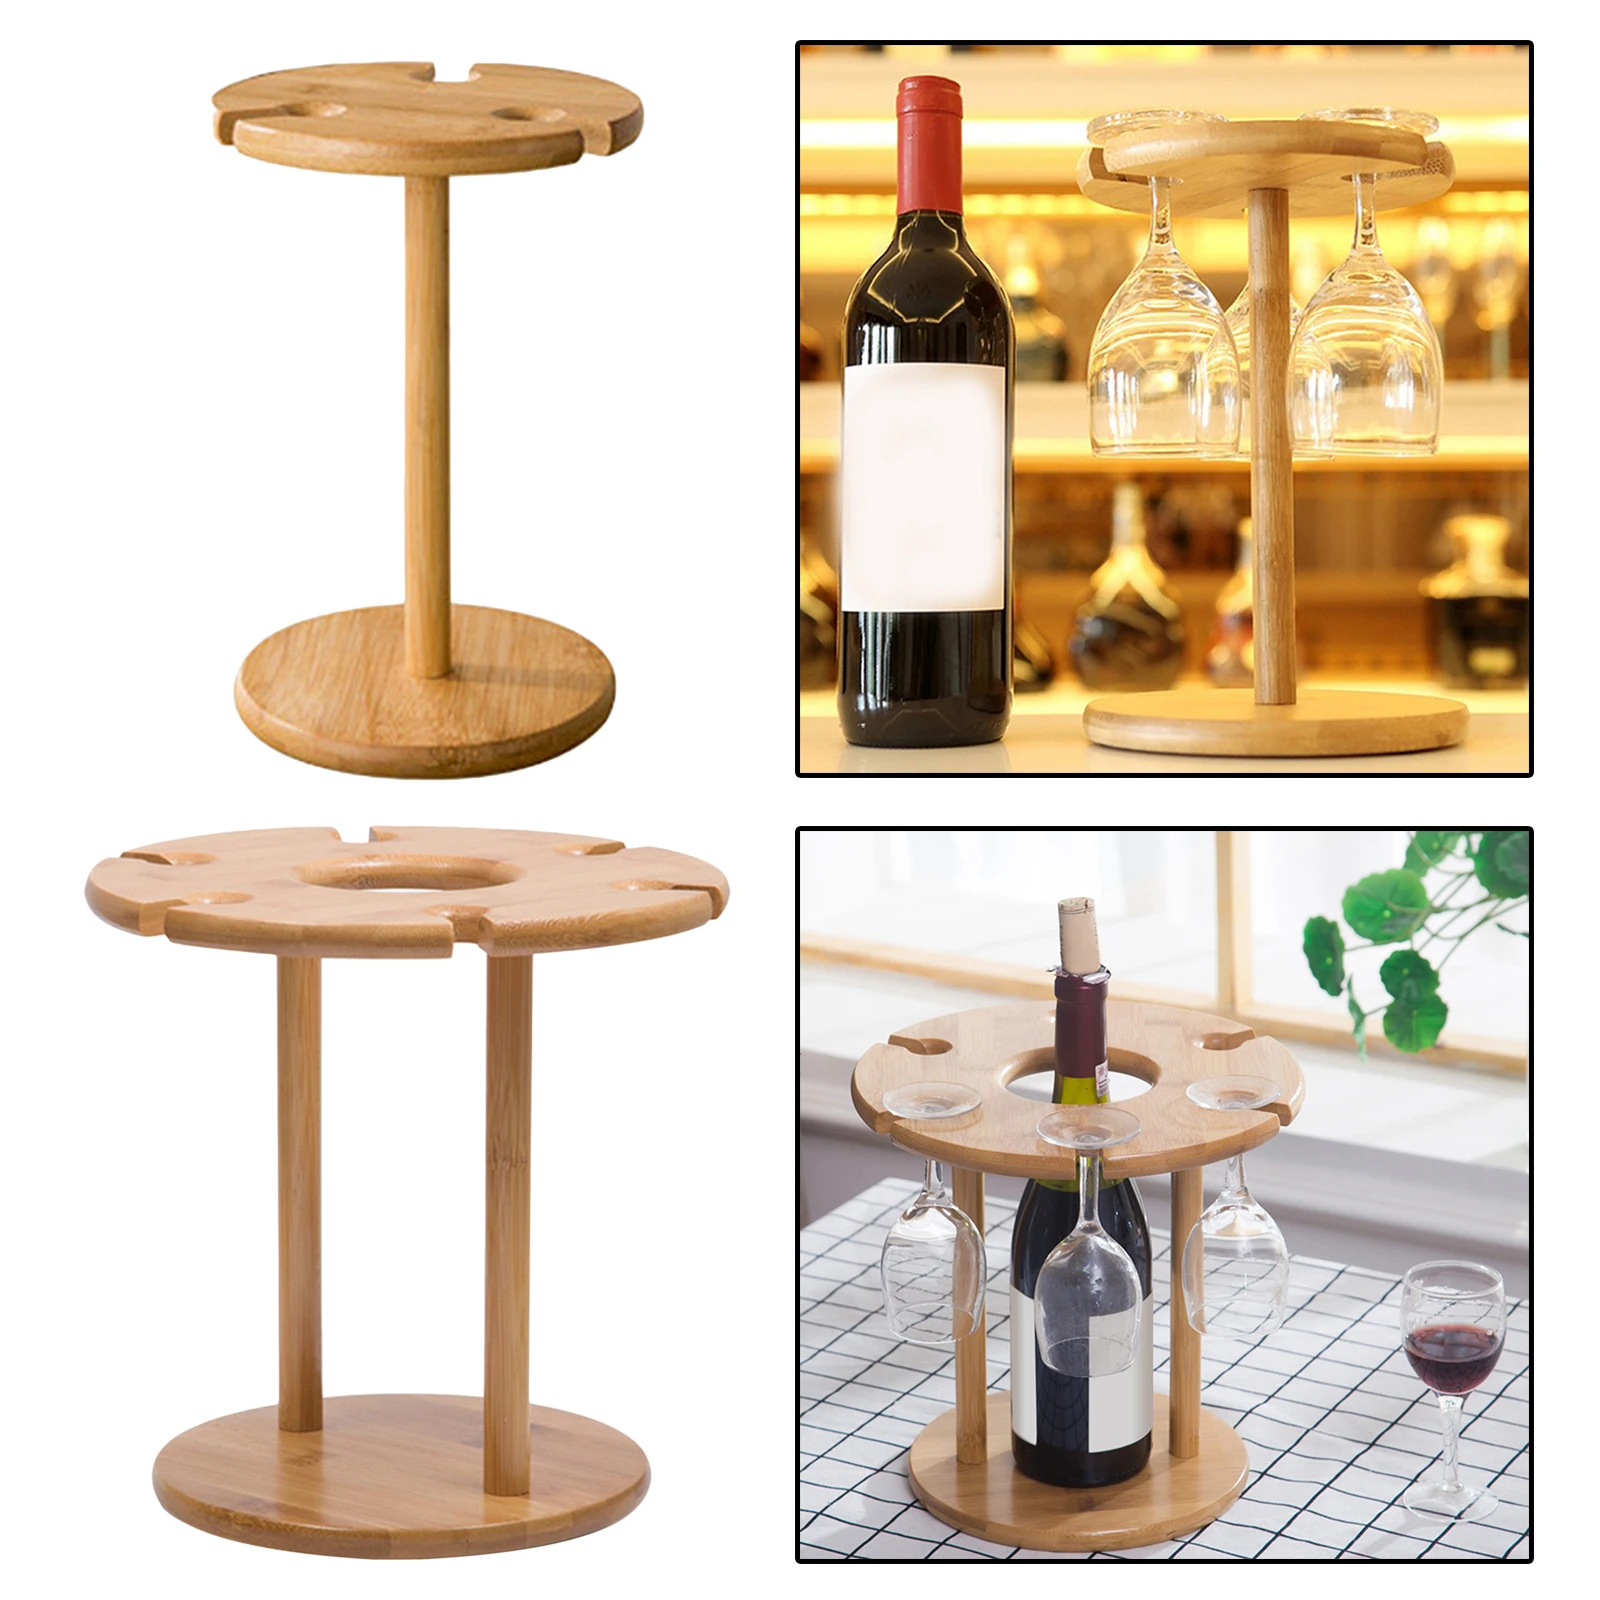 Wooden Wine Cup Holder Stand Goblet Wine Glass Holder Display Drying Rack